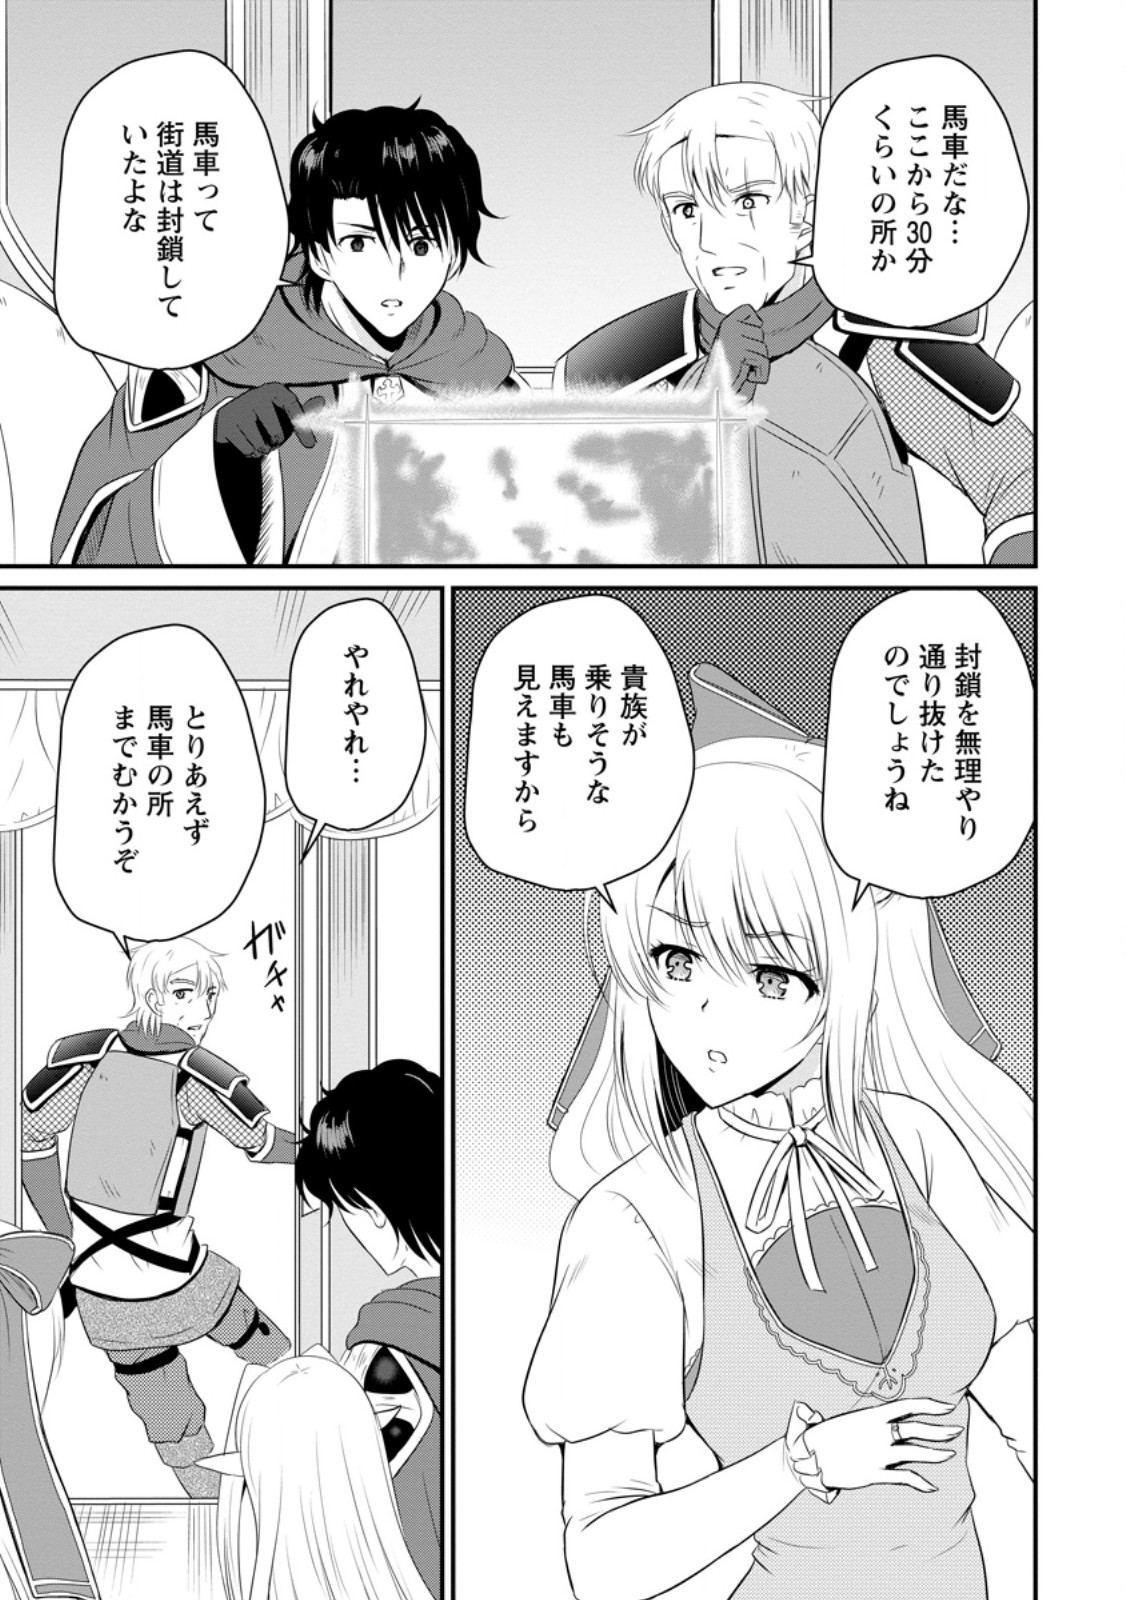 The Frontier Life of The Low-Class Ossan Healer And The Lovery Girl - Chapter 48.2 - Page 1